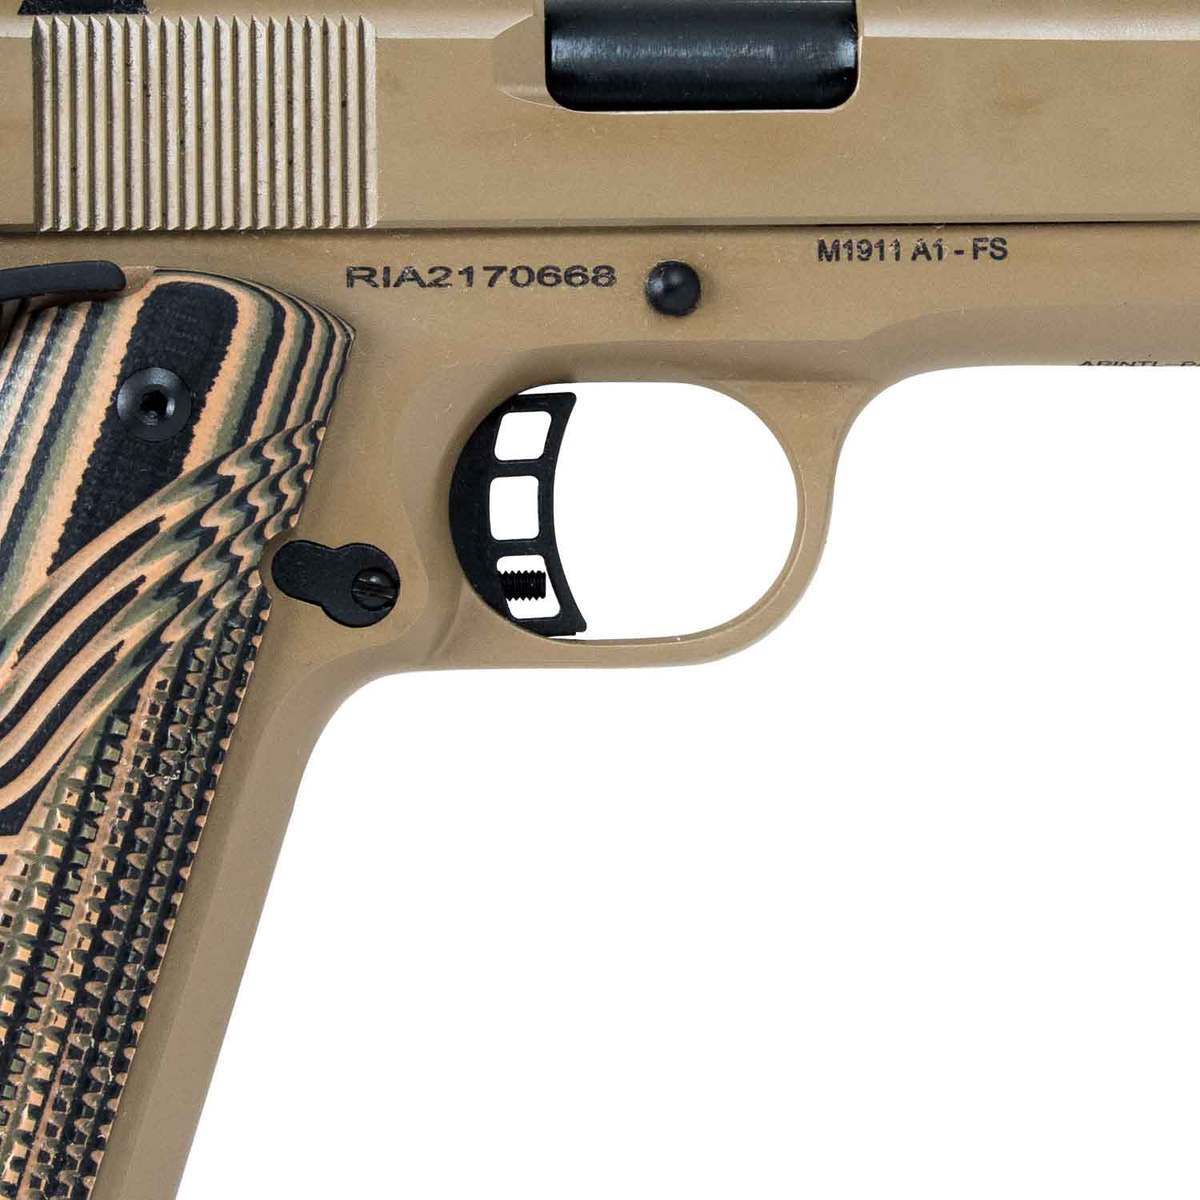 Rock Island M1911 A1 Fs Tactical 45 Auto Acp 5in Camoblack Pistol 81 Rounds Tan 2276